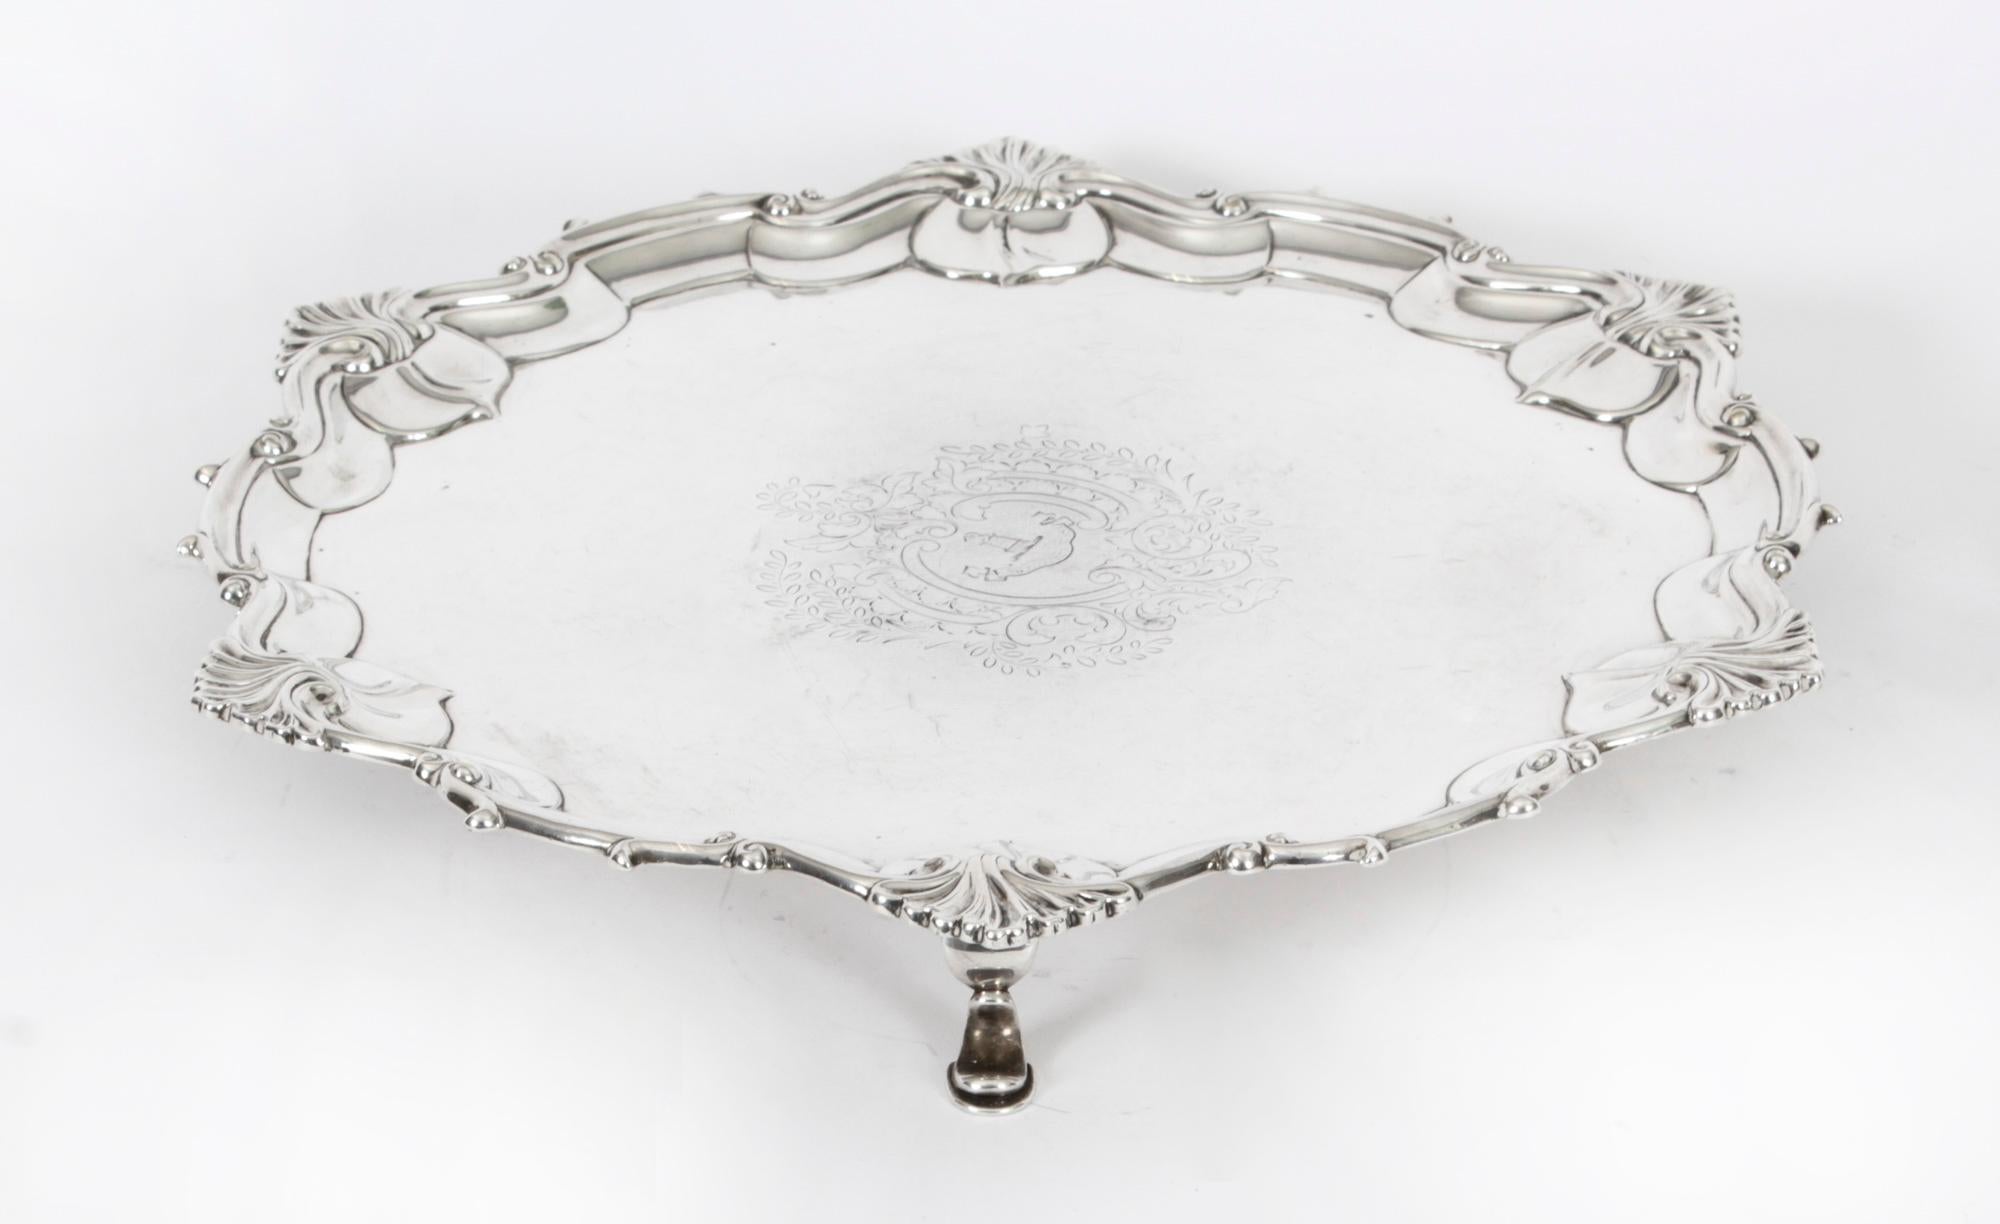 This is a wonderful antique silver plated Victorian salver bearing the makers mark of William Hutton & Sons, and dating from Circa 1860.
 
It has beautiful engraved floral and foliate decoration in the Neo-classical style and is raised on elegant